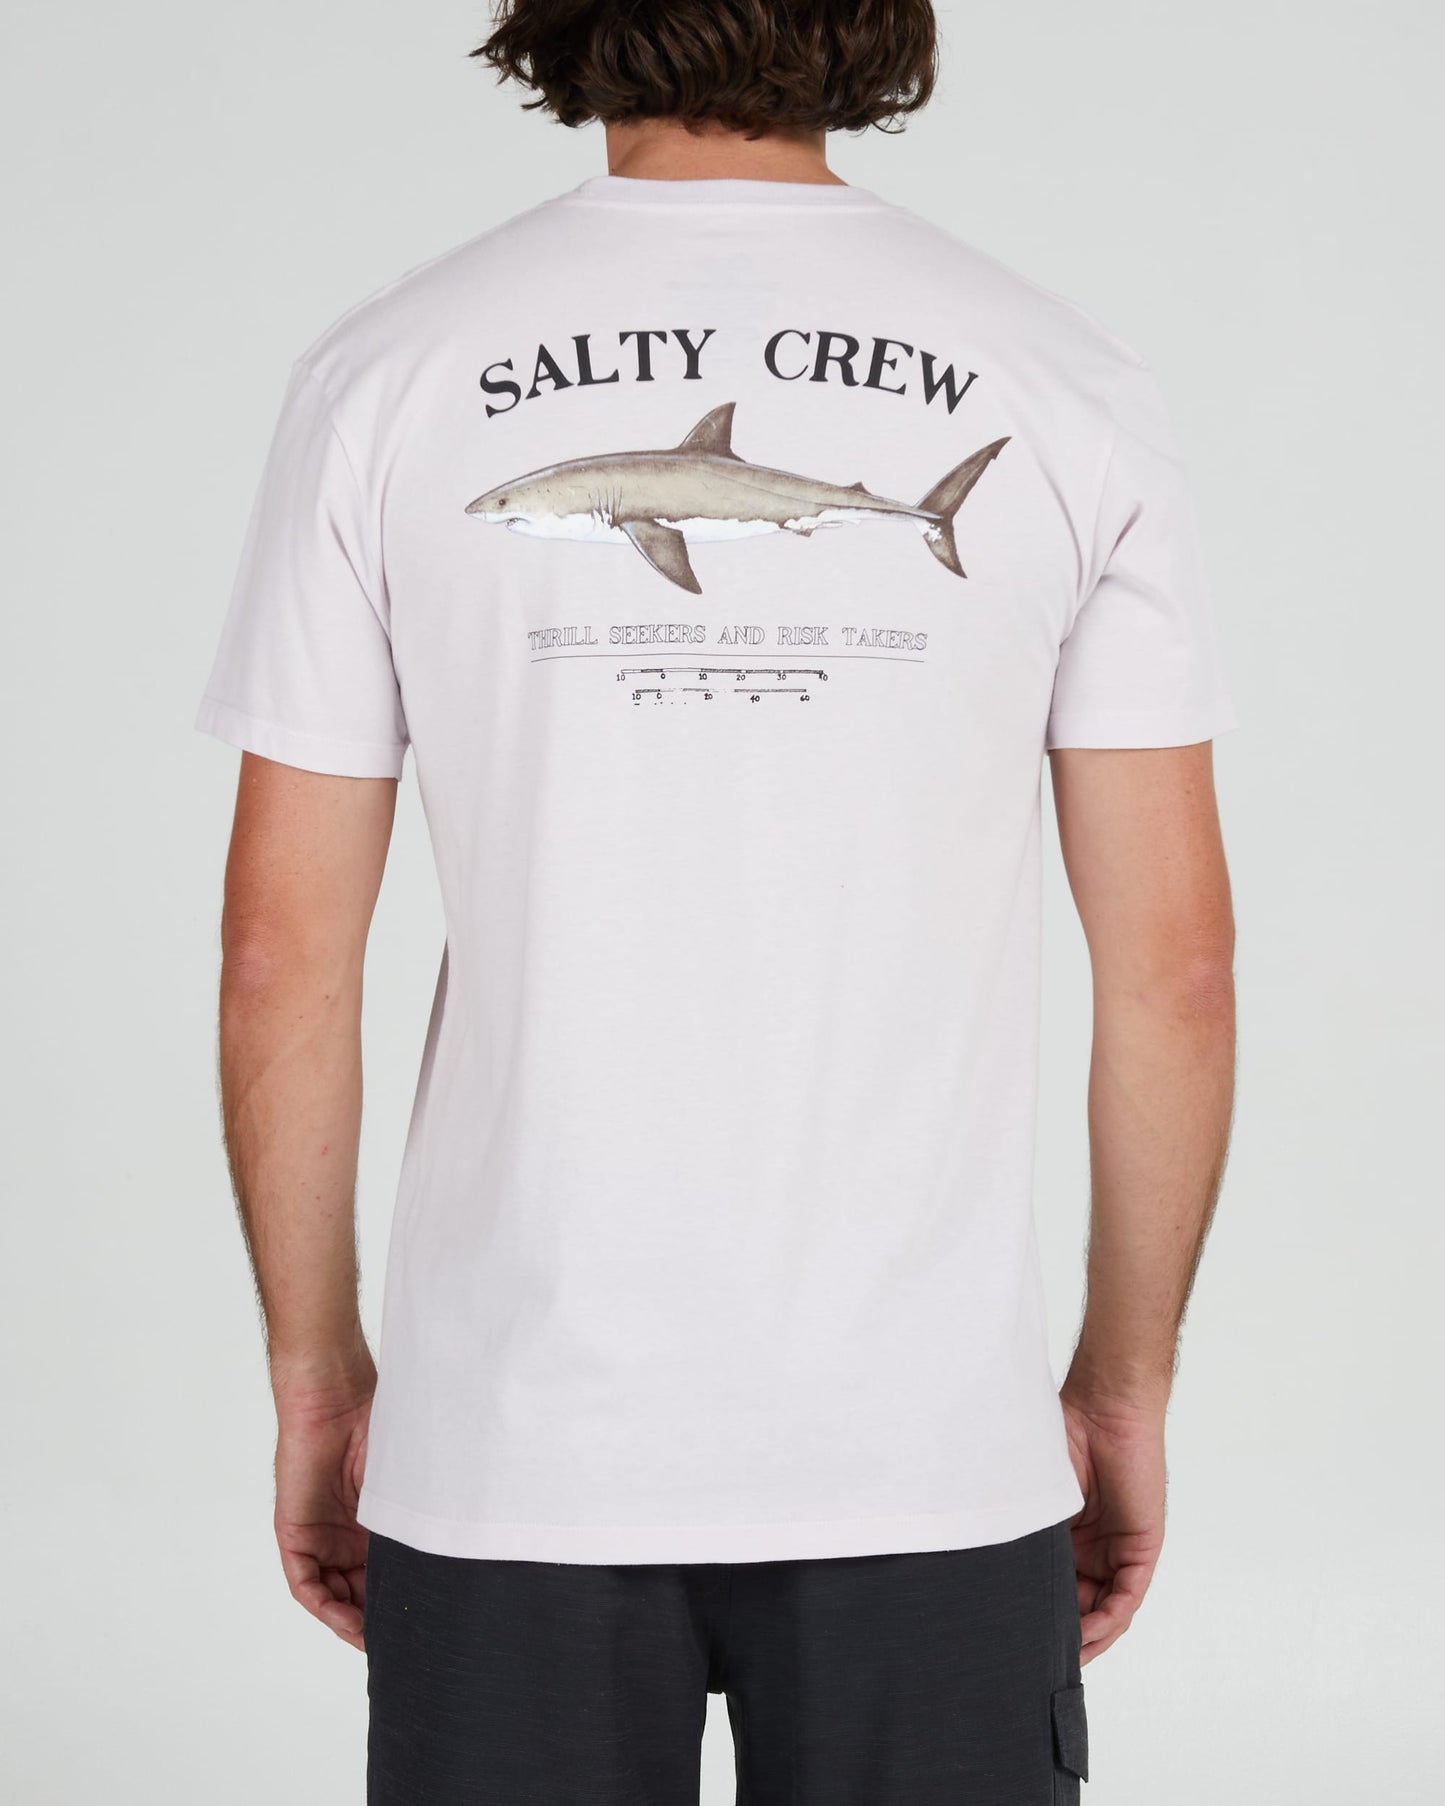 Salty crew T-SHIRTS S/S Bruce Premium S/S Tee - Lavender in Lavender